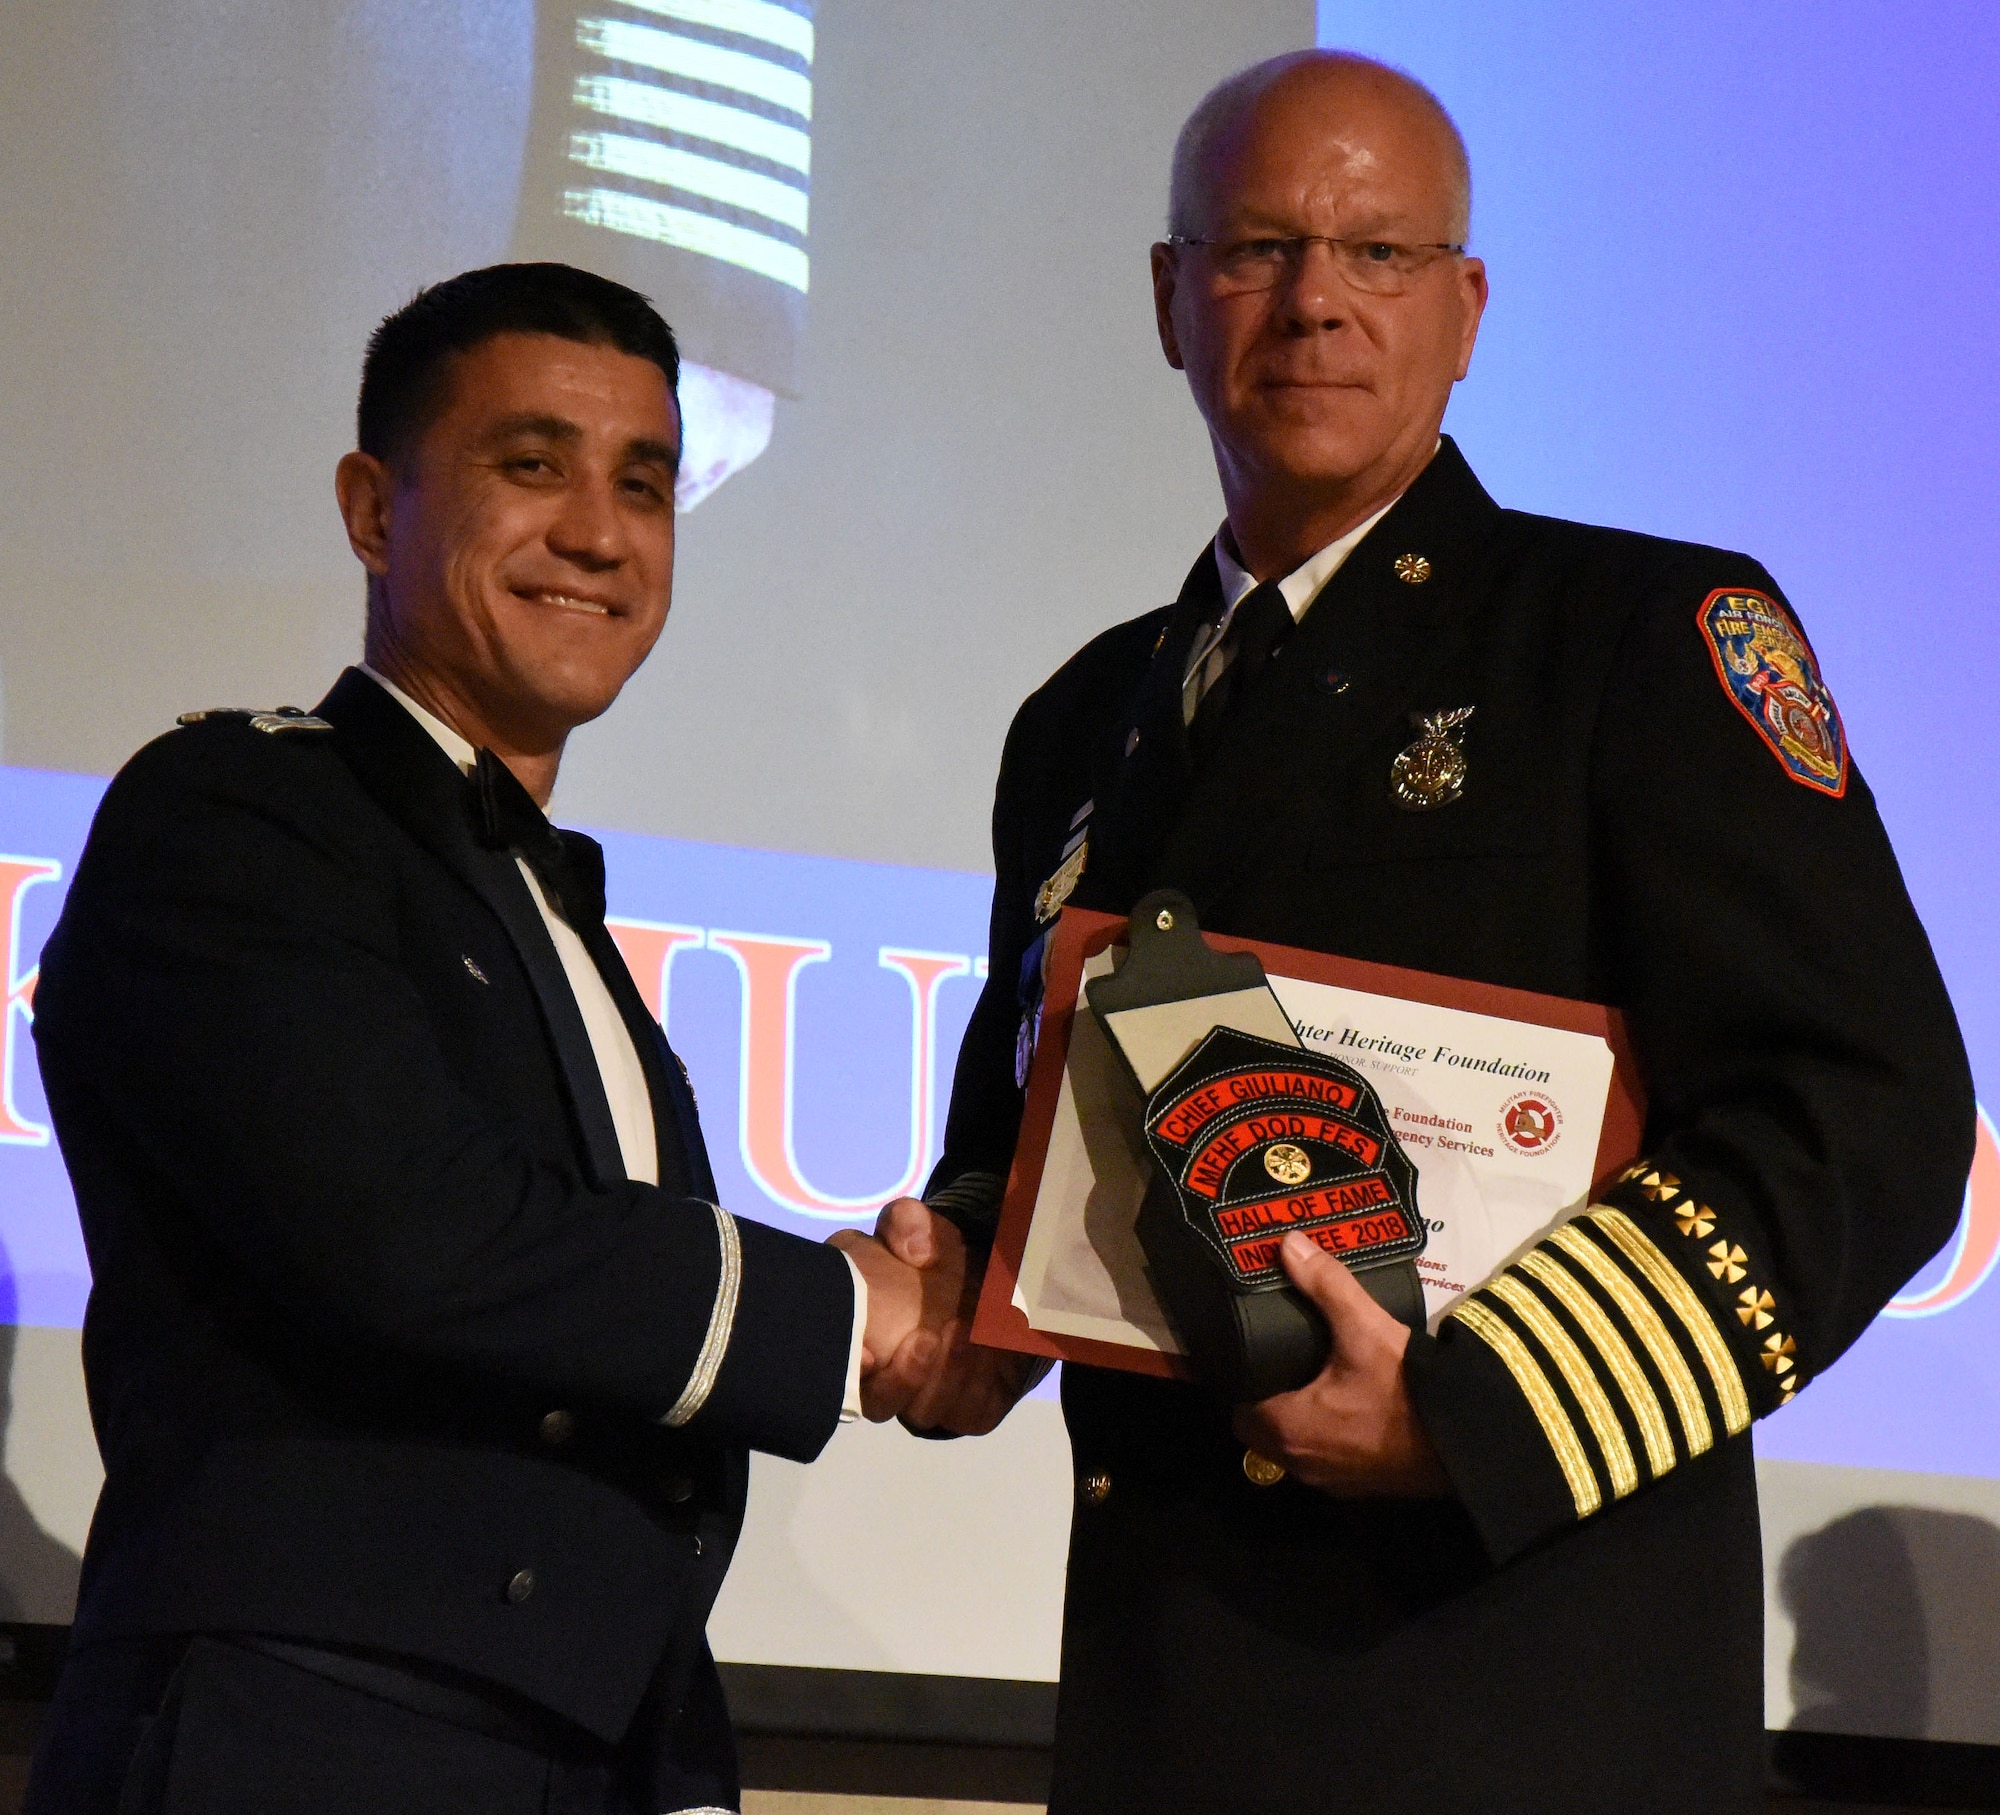 U.S. Air Force Col. Ricky Mills, 17th Training Wing commander, congratulates Chief Mark Guiliano, on receiving the Lifetime Achievement Award and being inducted into the Hall of Fame during the 16th Annual Firefighter Ball at the McNease Convention Center, San Angelo, Texas, April 28, 2018. Guiliano started his career in 1978 as an Air Force firefighter and crossed into the civilian sector in 2001. (U.S. Air Force photo by Airman 1st Class Seraiah Hines/Released)